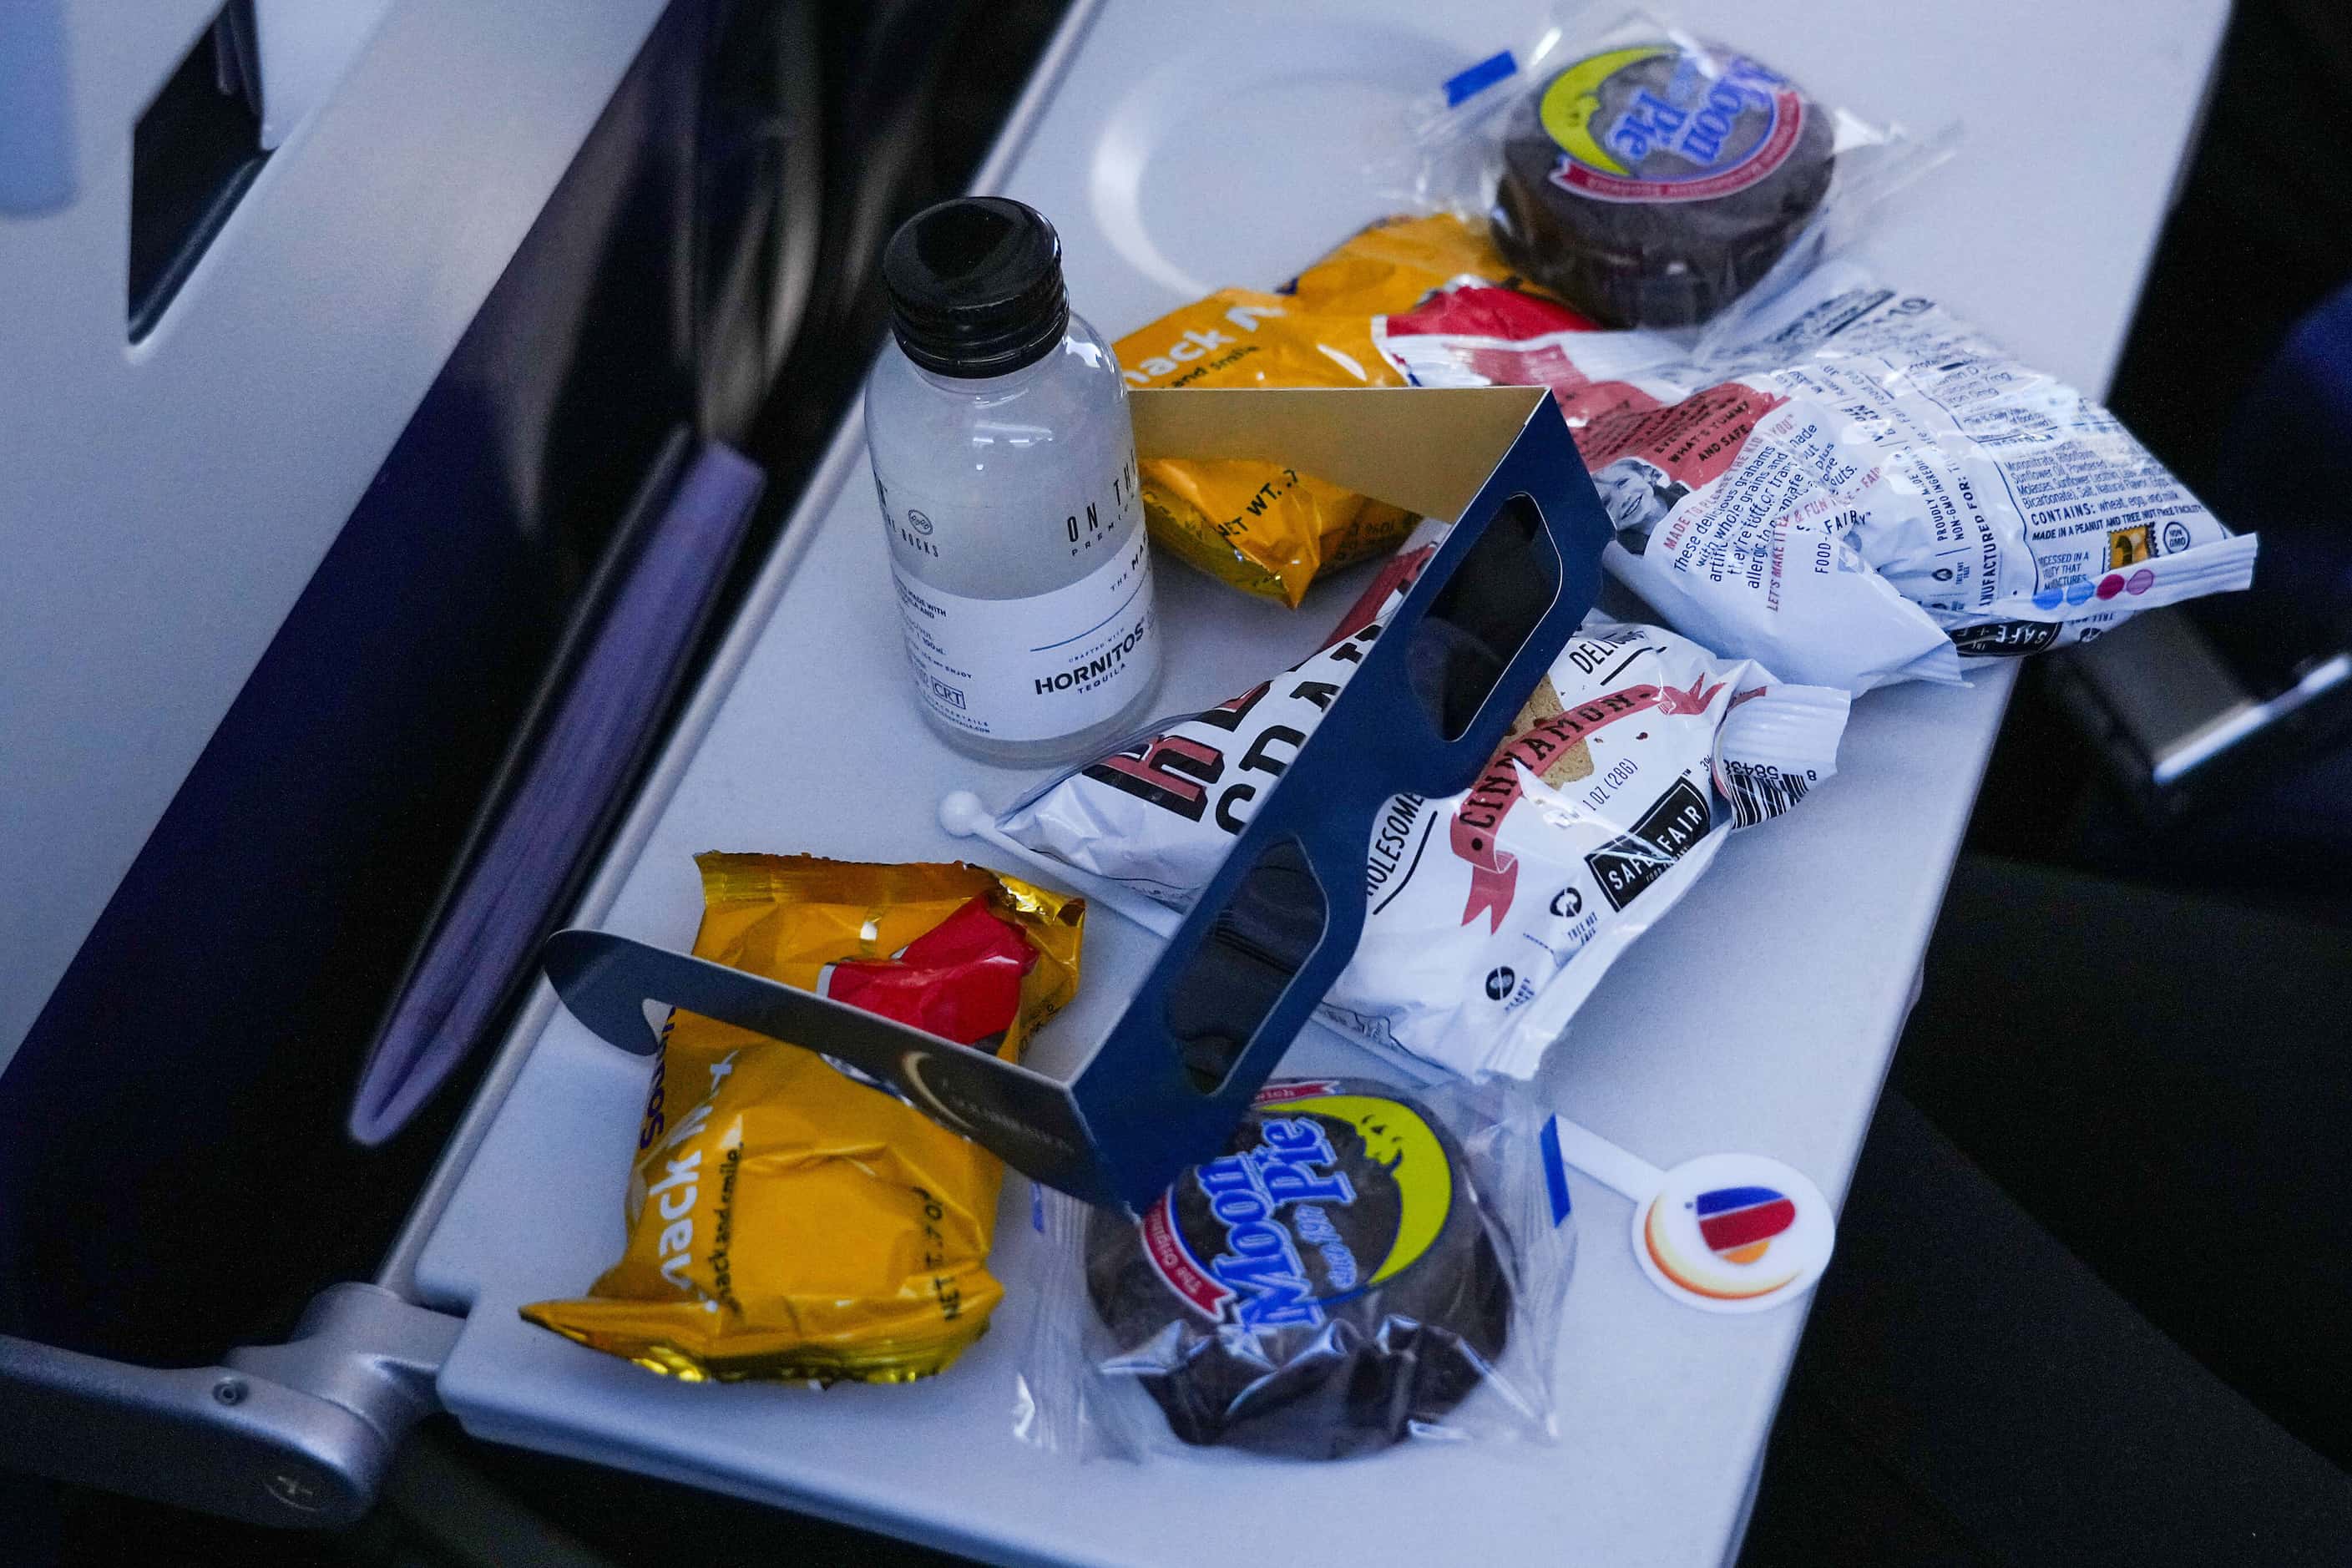 Eclipse glasses and Moon Pies on a passenger’s tray table on Southwest flight #1252 from...